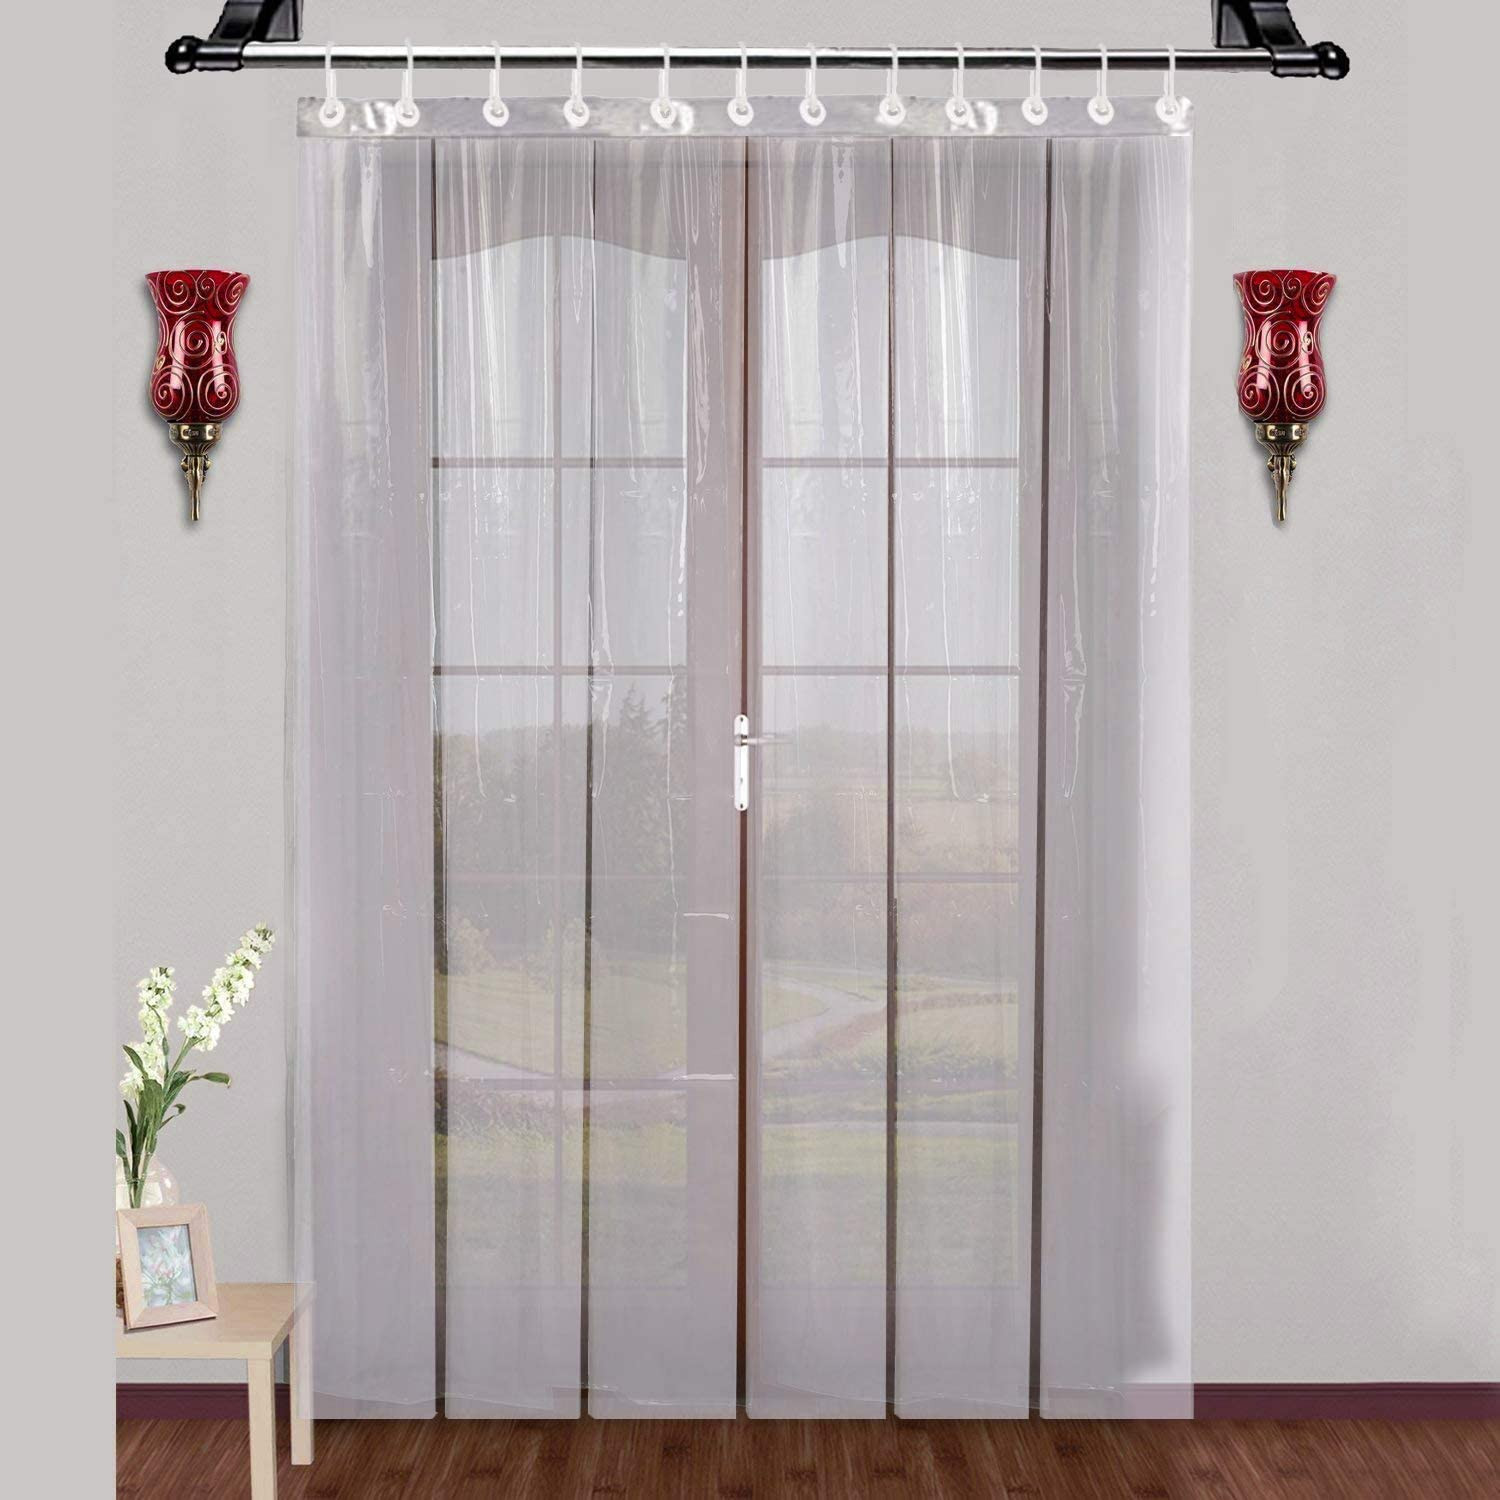 Kuber Industries .50MM Pack Of 1| Rings AC Curtain | PVC 6 Strips AC Curtain | Window Curtain for Bathroom | Curtains for Door | Waterproof Shower Curtain | 8 Feet| Transparent